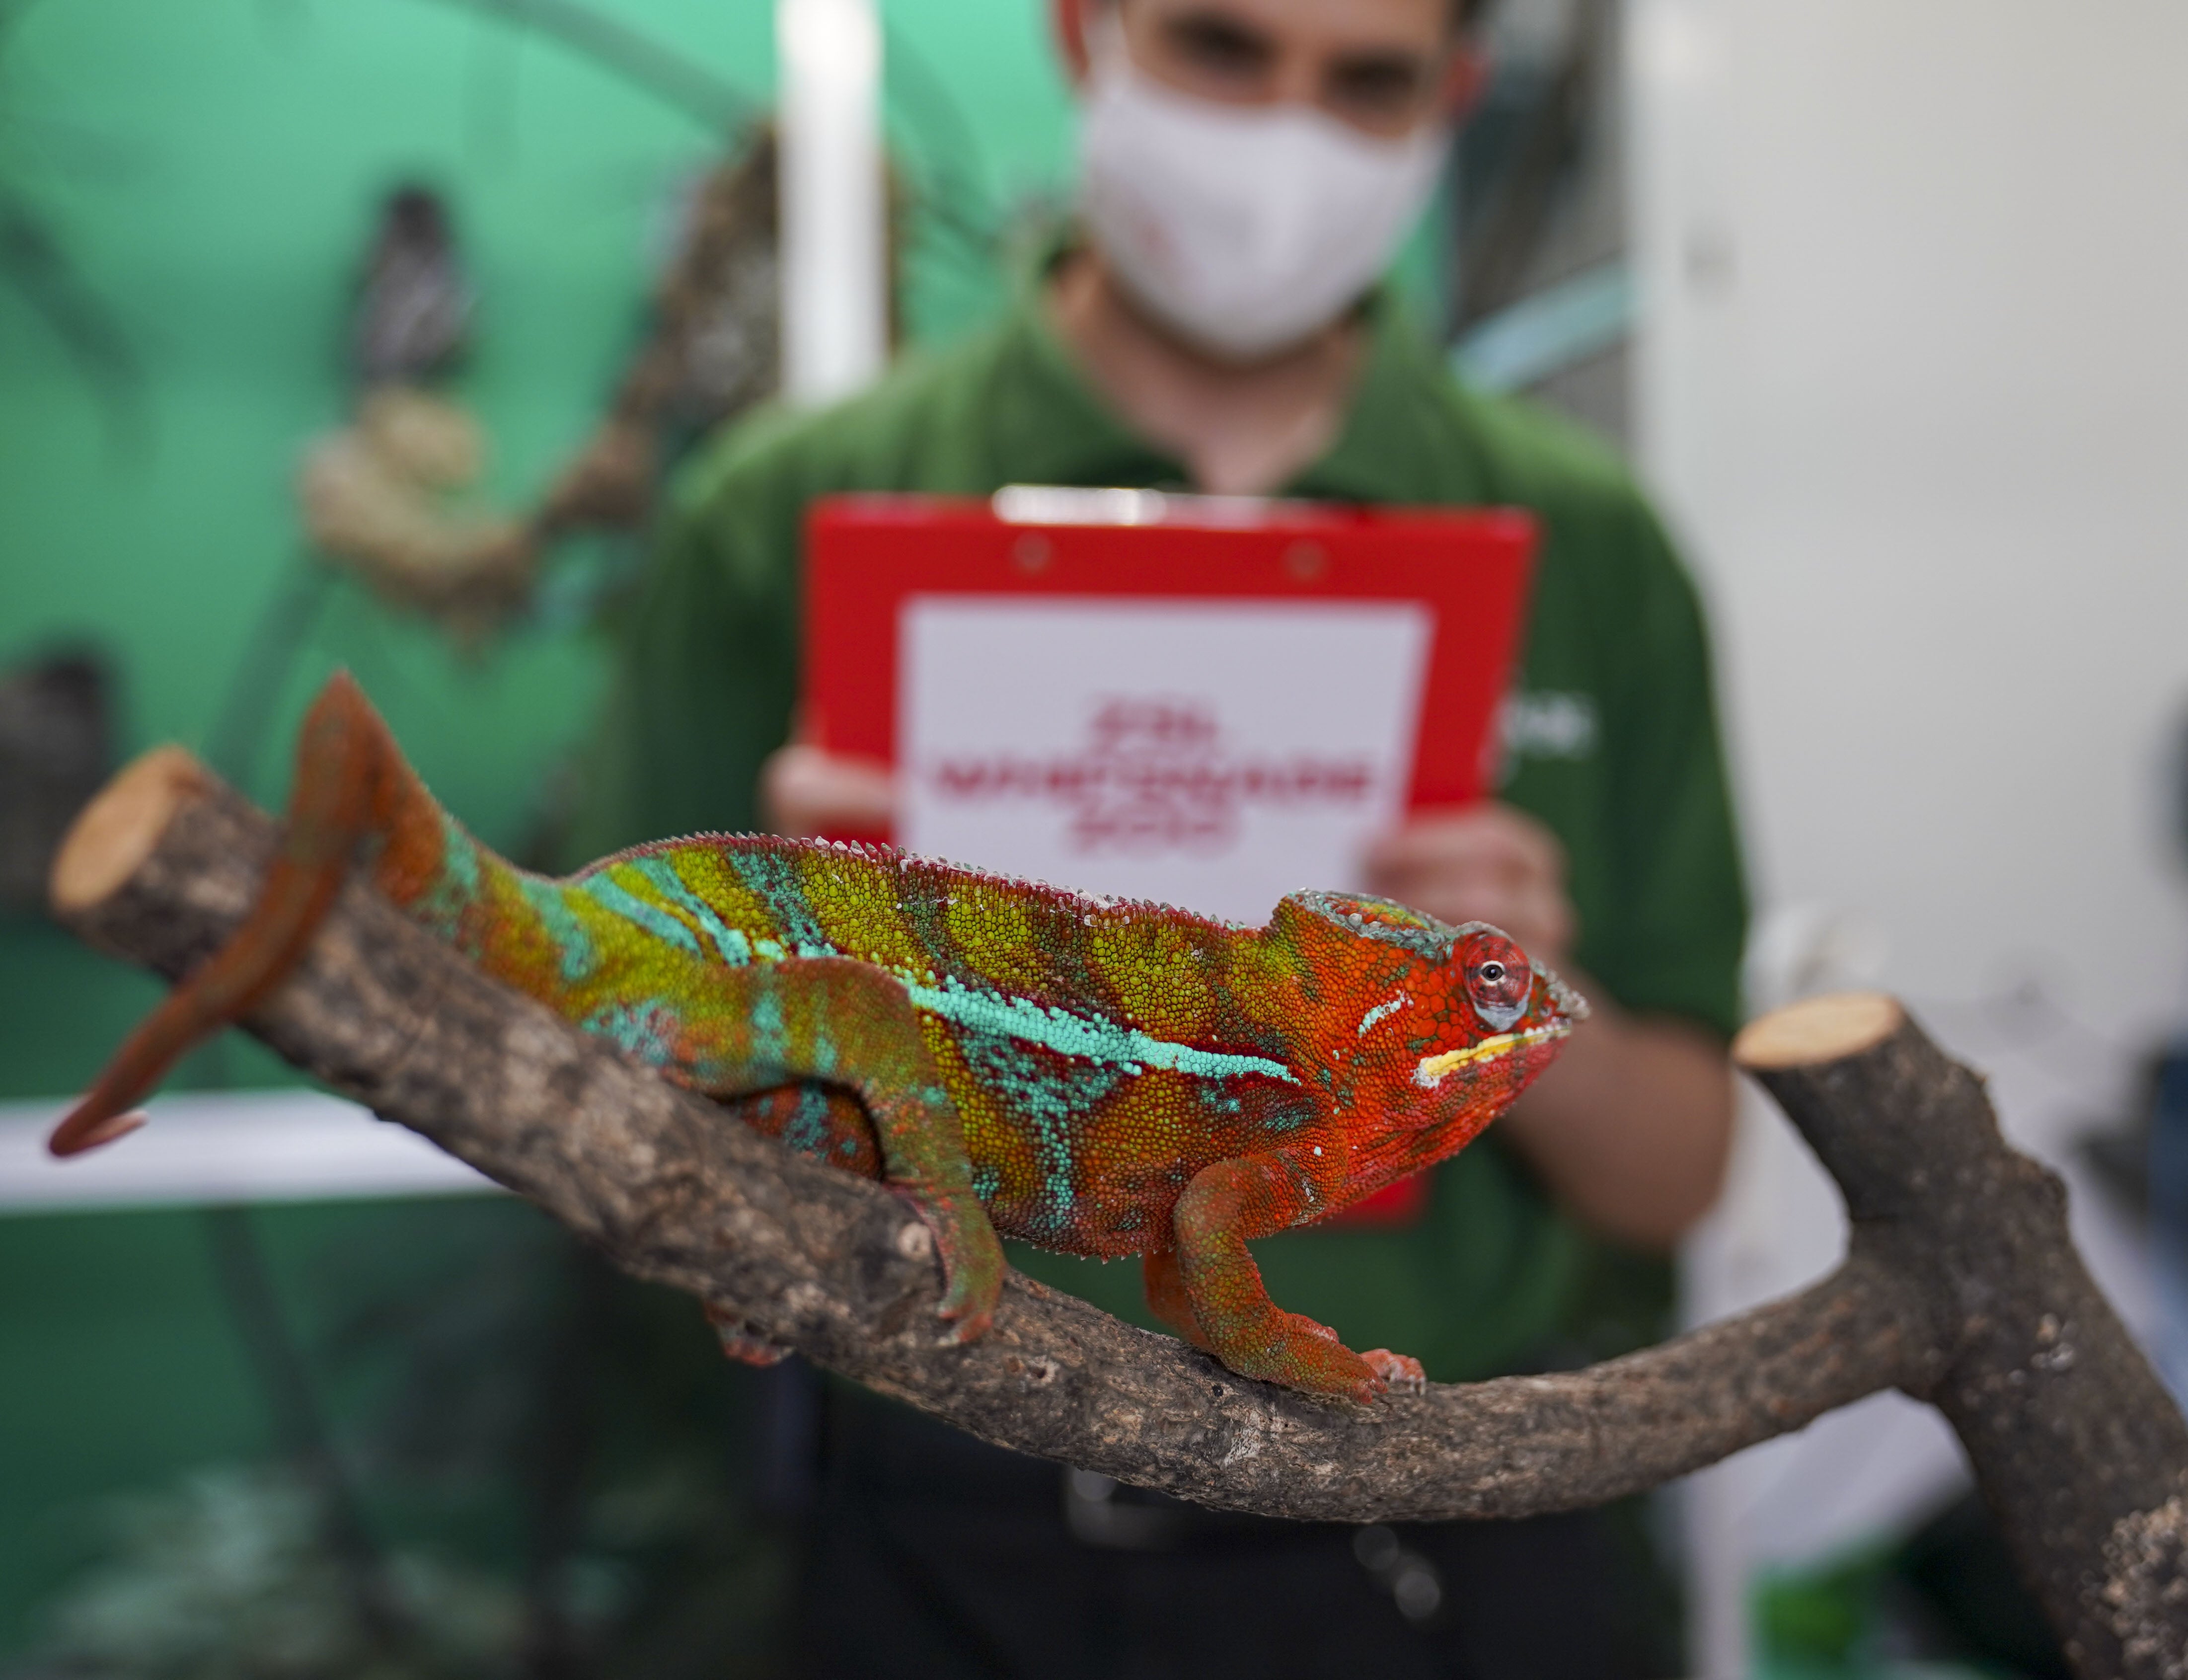 A panther chameleon relaxing at a comfortable temperature. Cells from the species are now being held at -196C